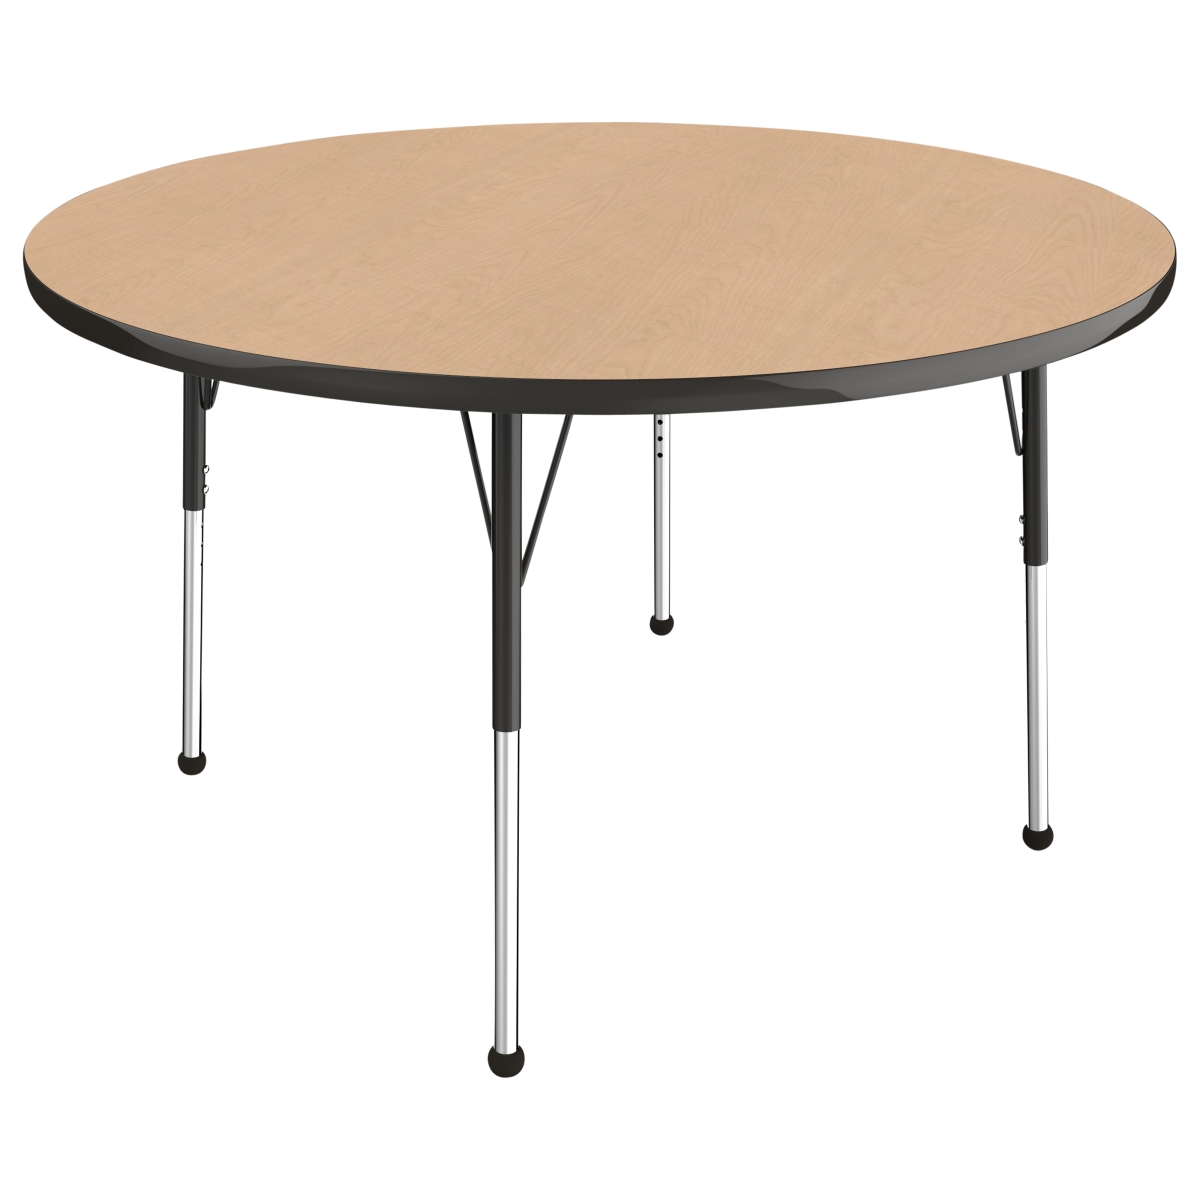 10044-mpbk 48 In. Round T-mold Adjustable Activity Table With Standard Ball - Maple & Black